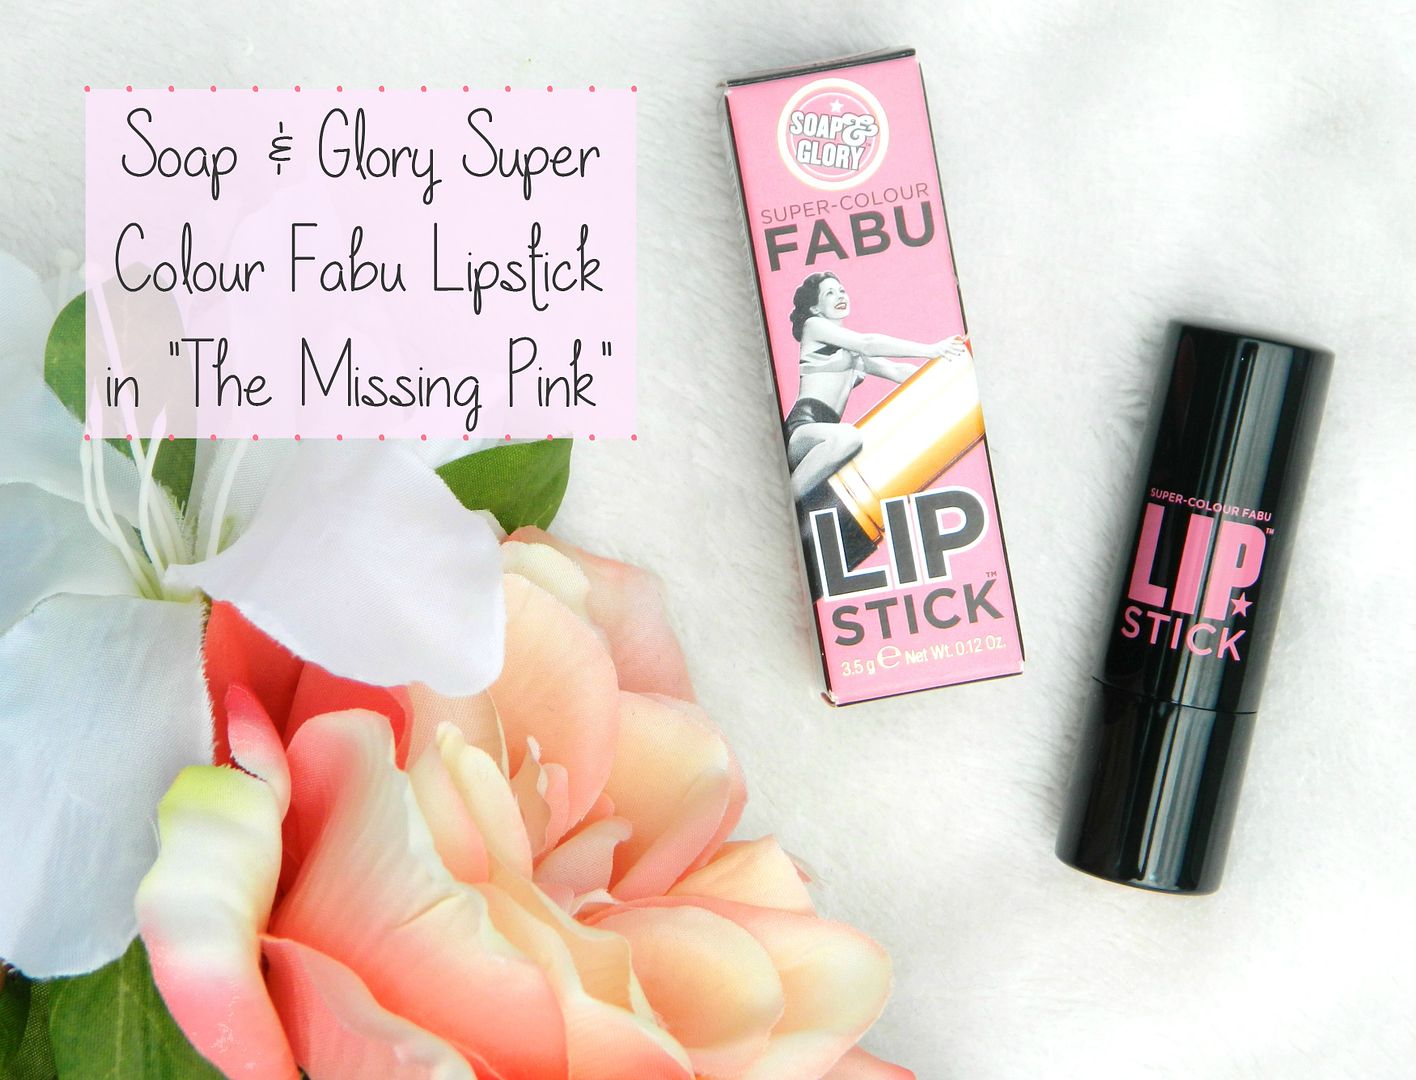 Soap And Glory Super Colour Fabu Lipstick In The Missing Pink Satin Finish Review Belle Amie UK Beauty Fashion Lifestyle Blog